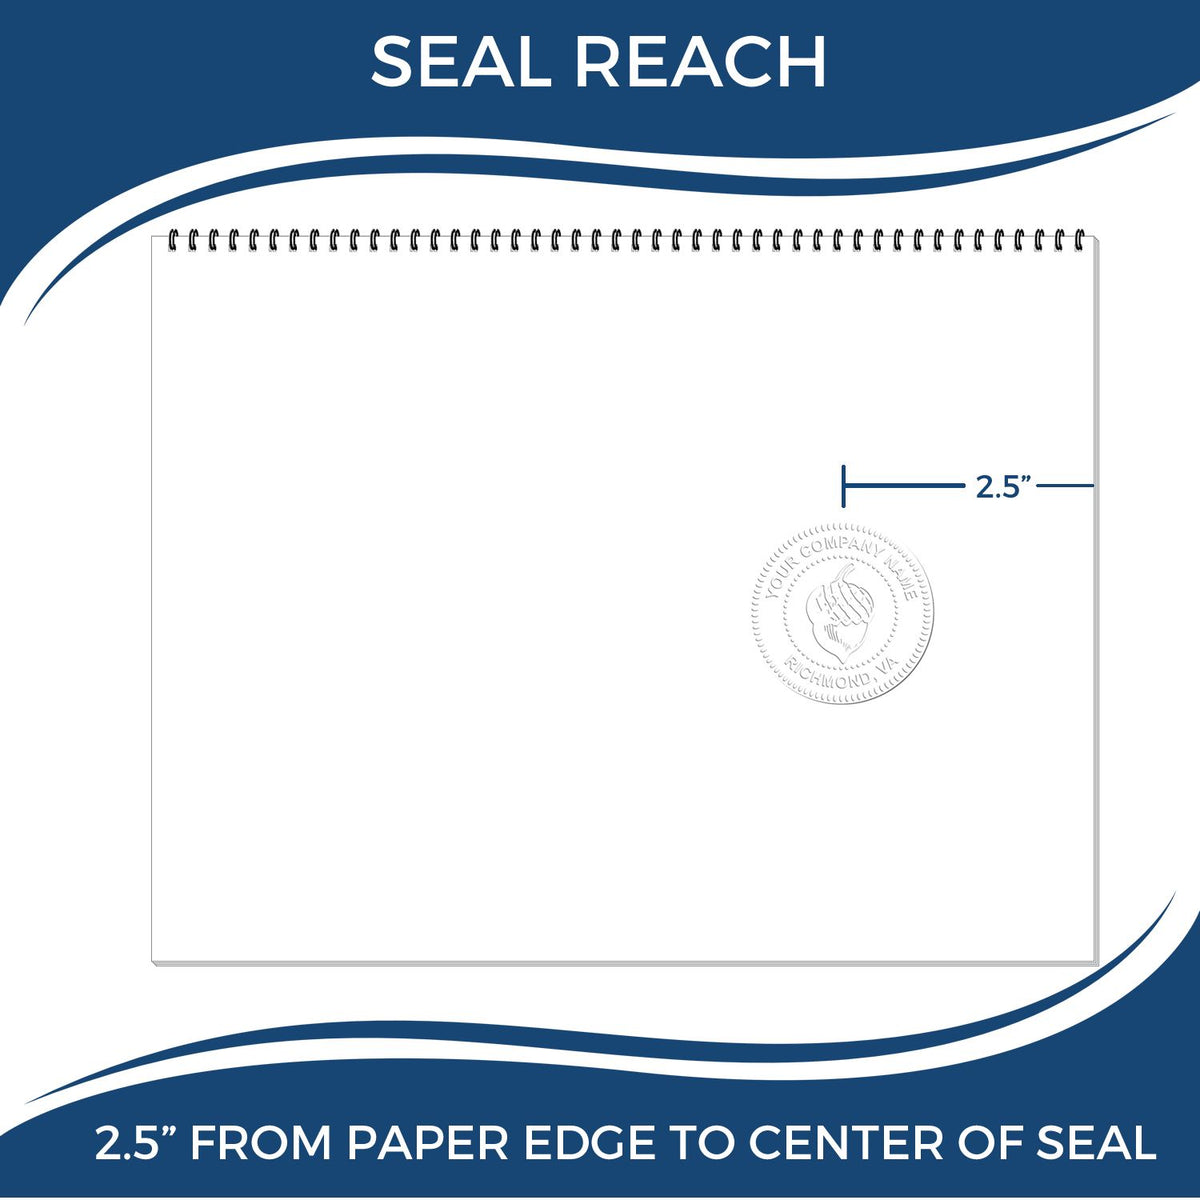 An infographic showing the seal reach which is represented by a ruler and a miniature seal image of the Heavy Duty Cast Iron New Hampshire Engineer Seal Embosser